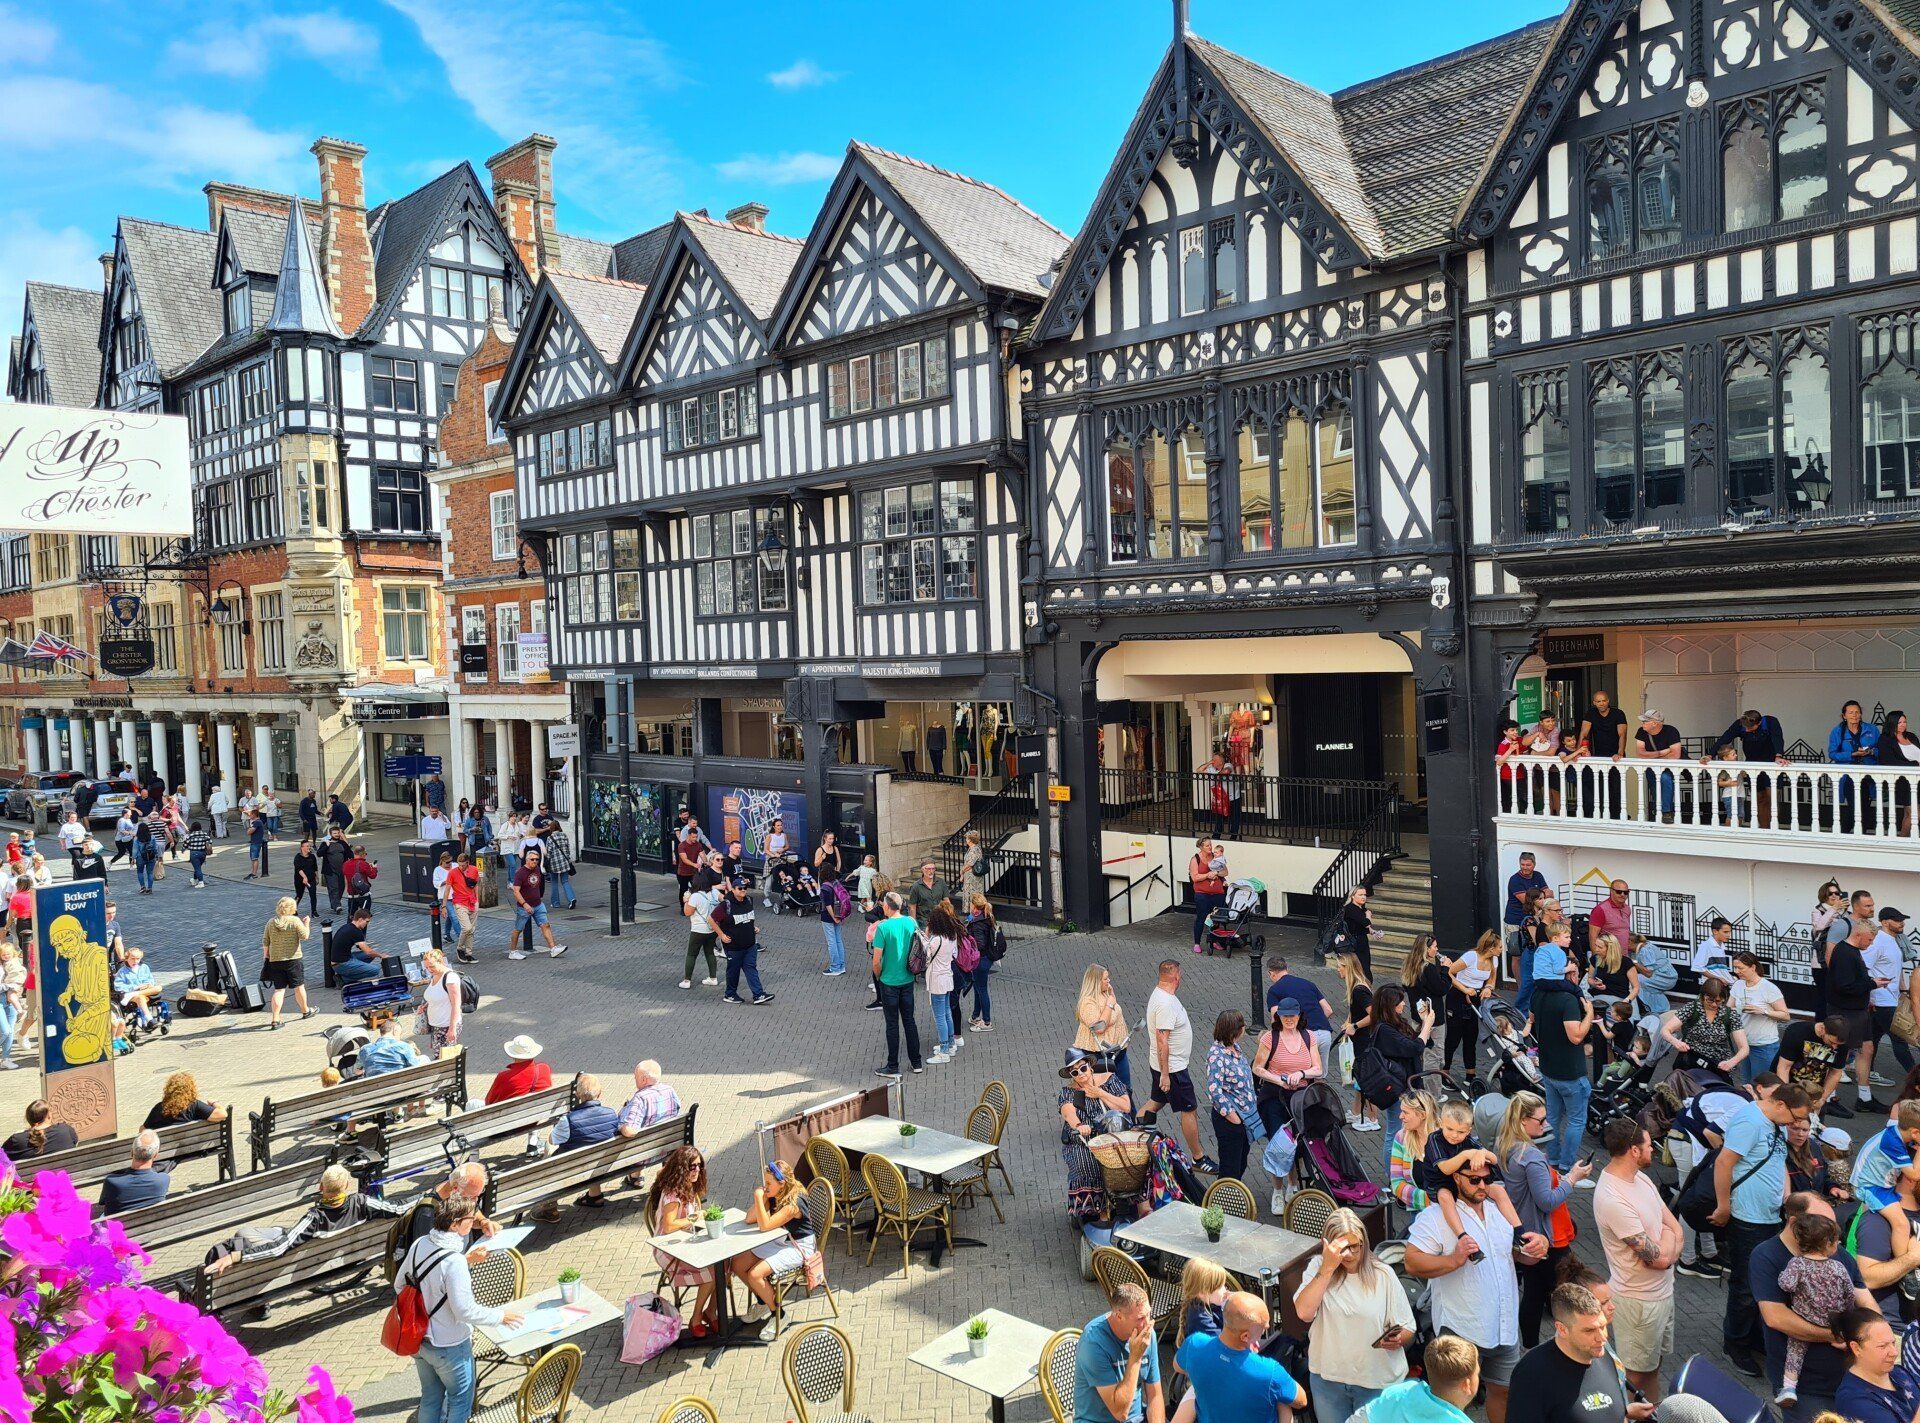 Visit the Historic town of Chester